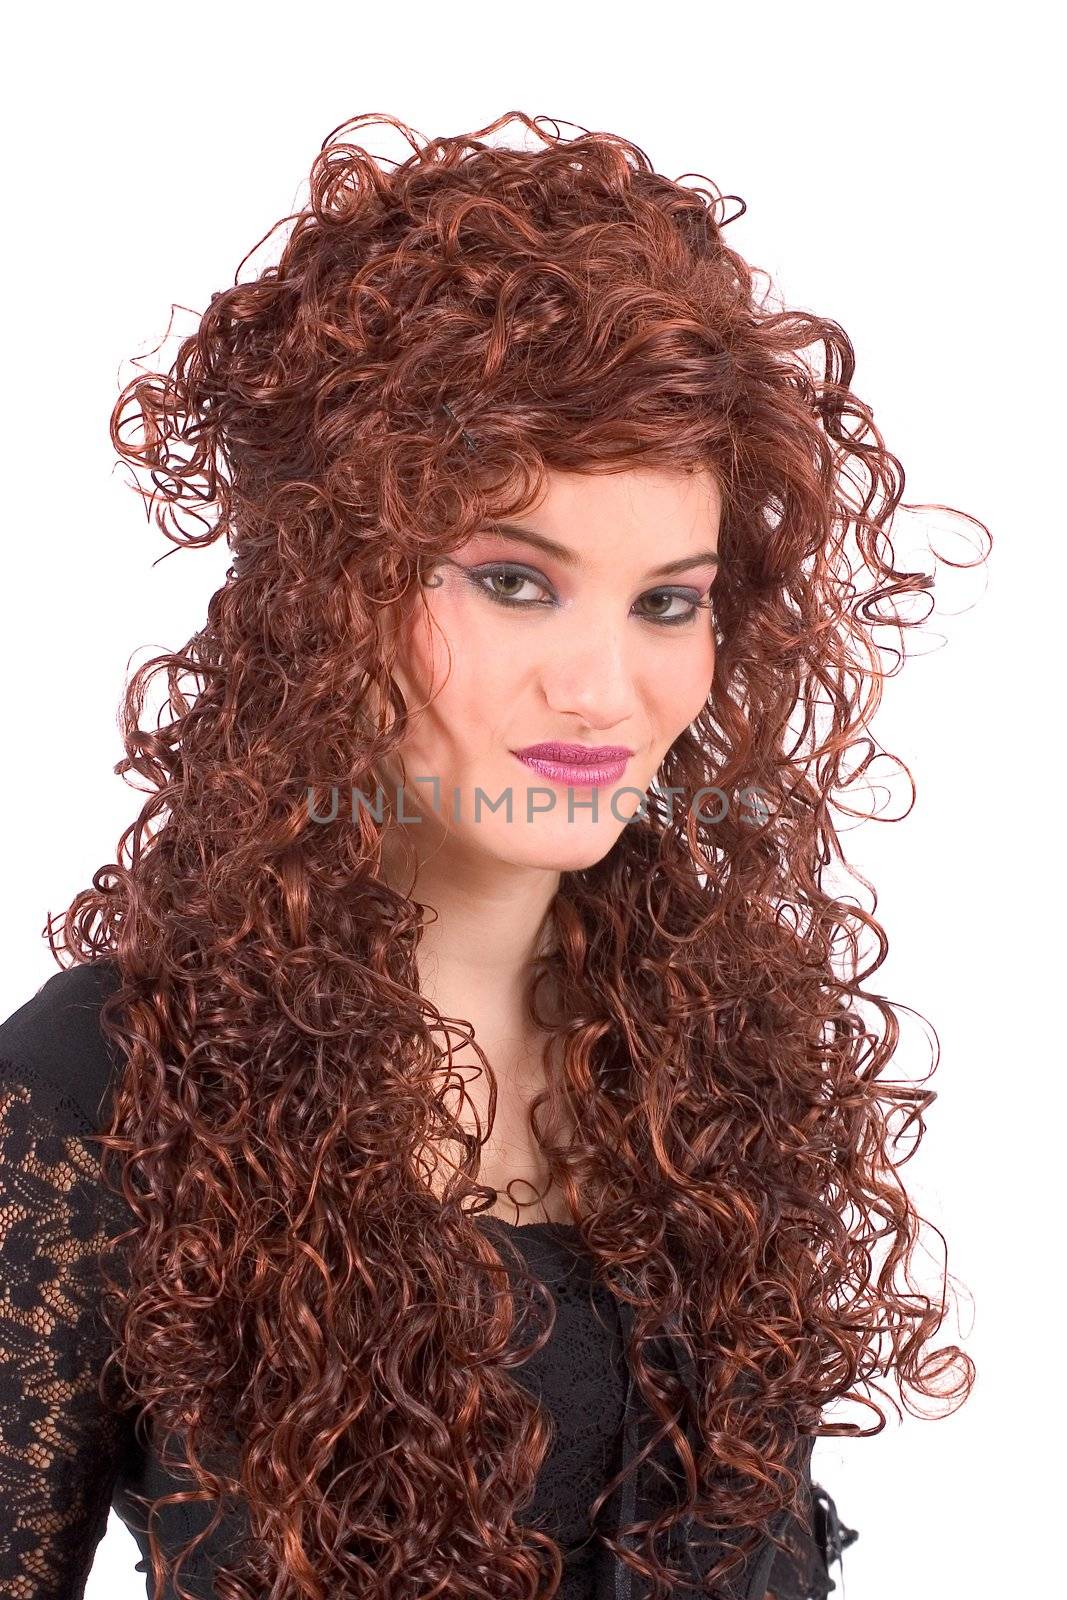 Gorgeous teenager with long curly hair by Fotosmurf